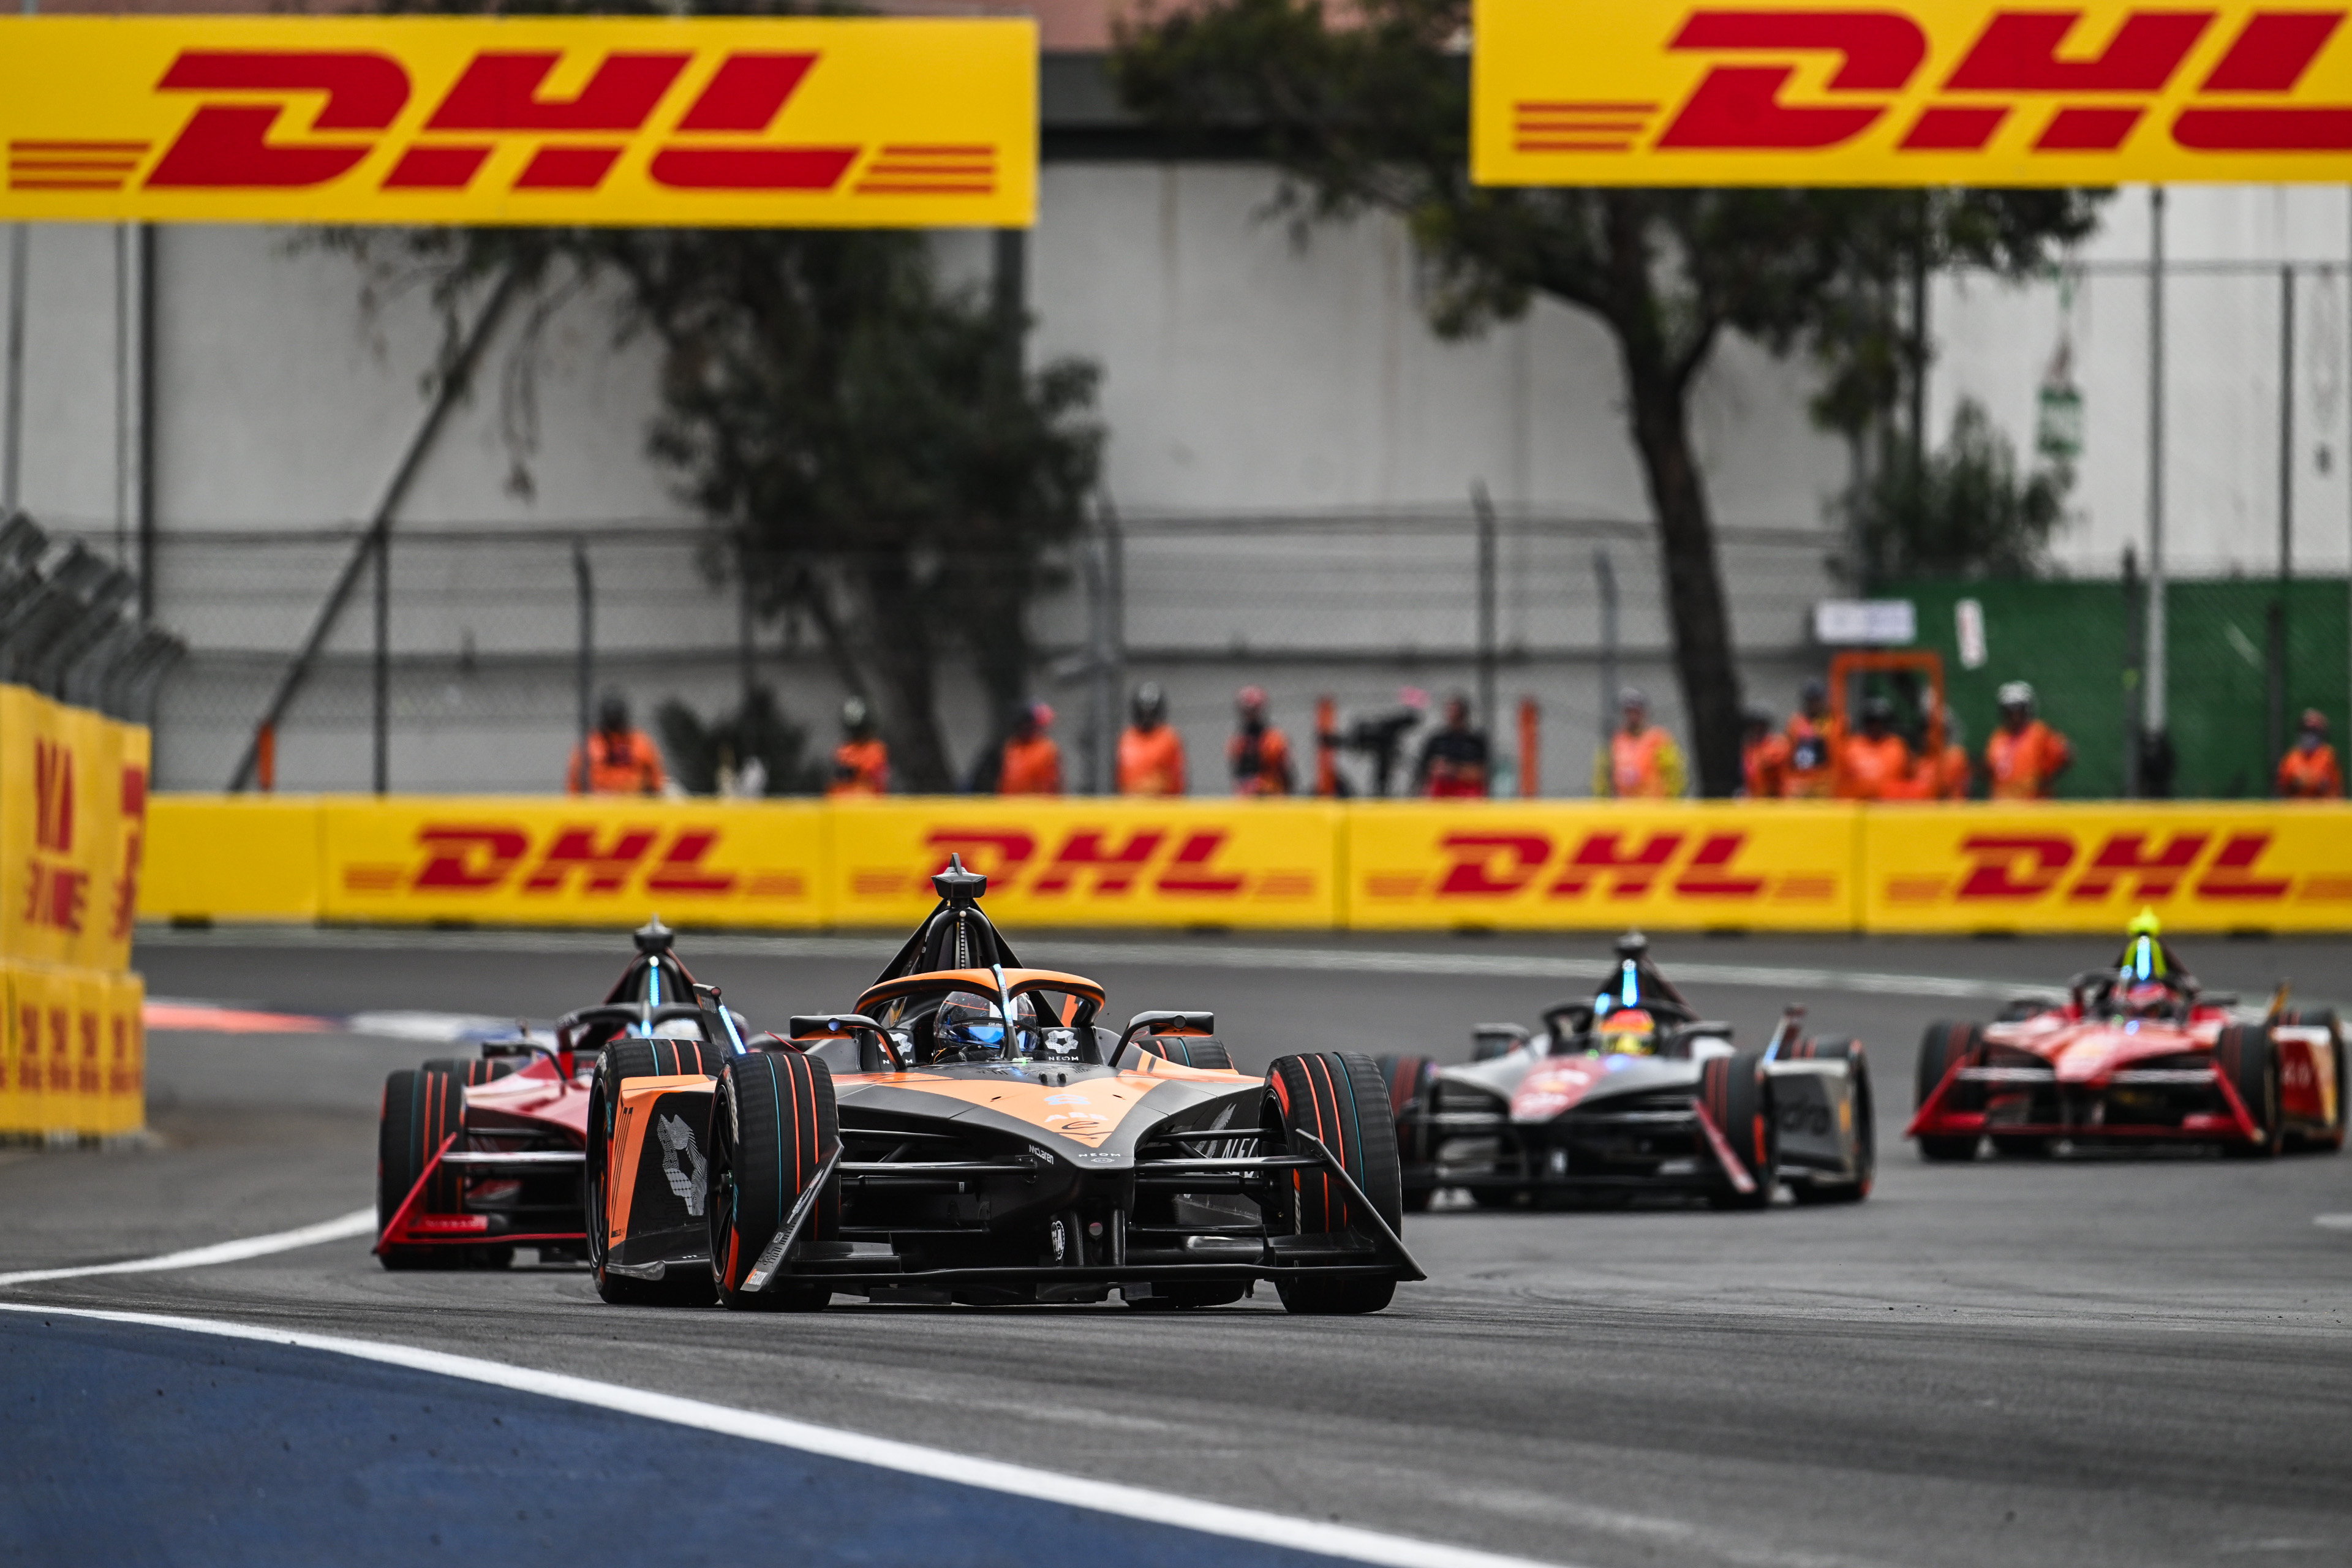 DHL is delivering Formula E to Shanghai, China